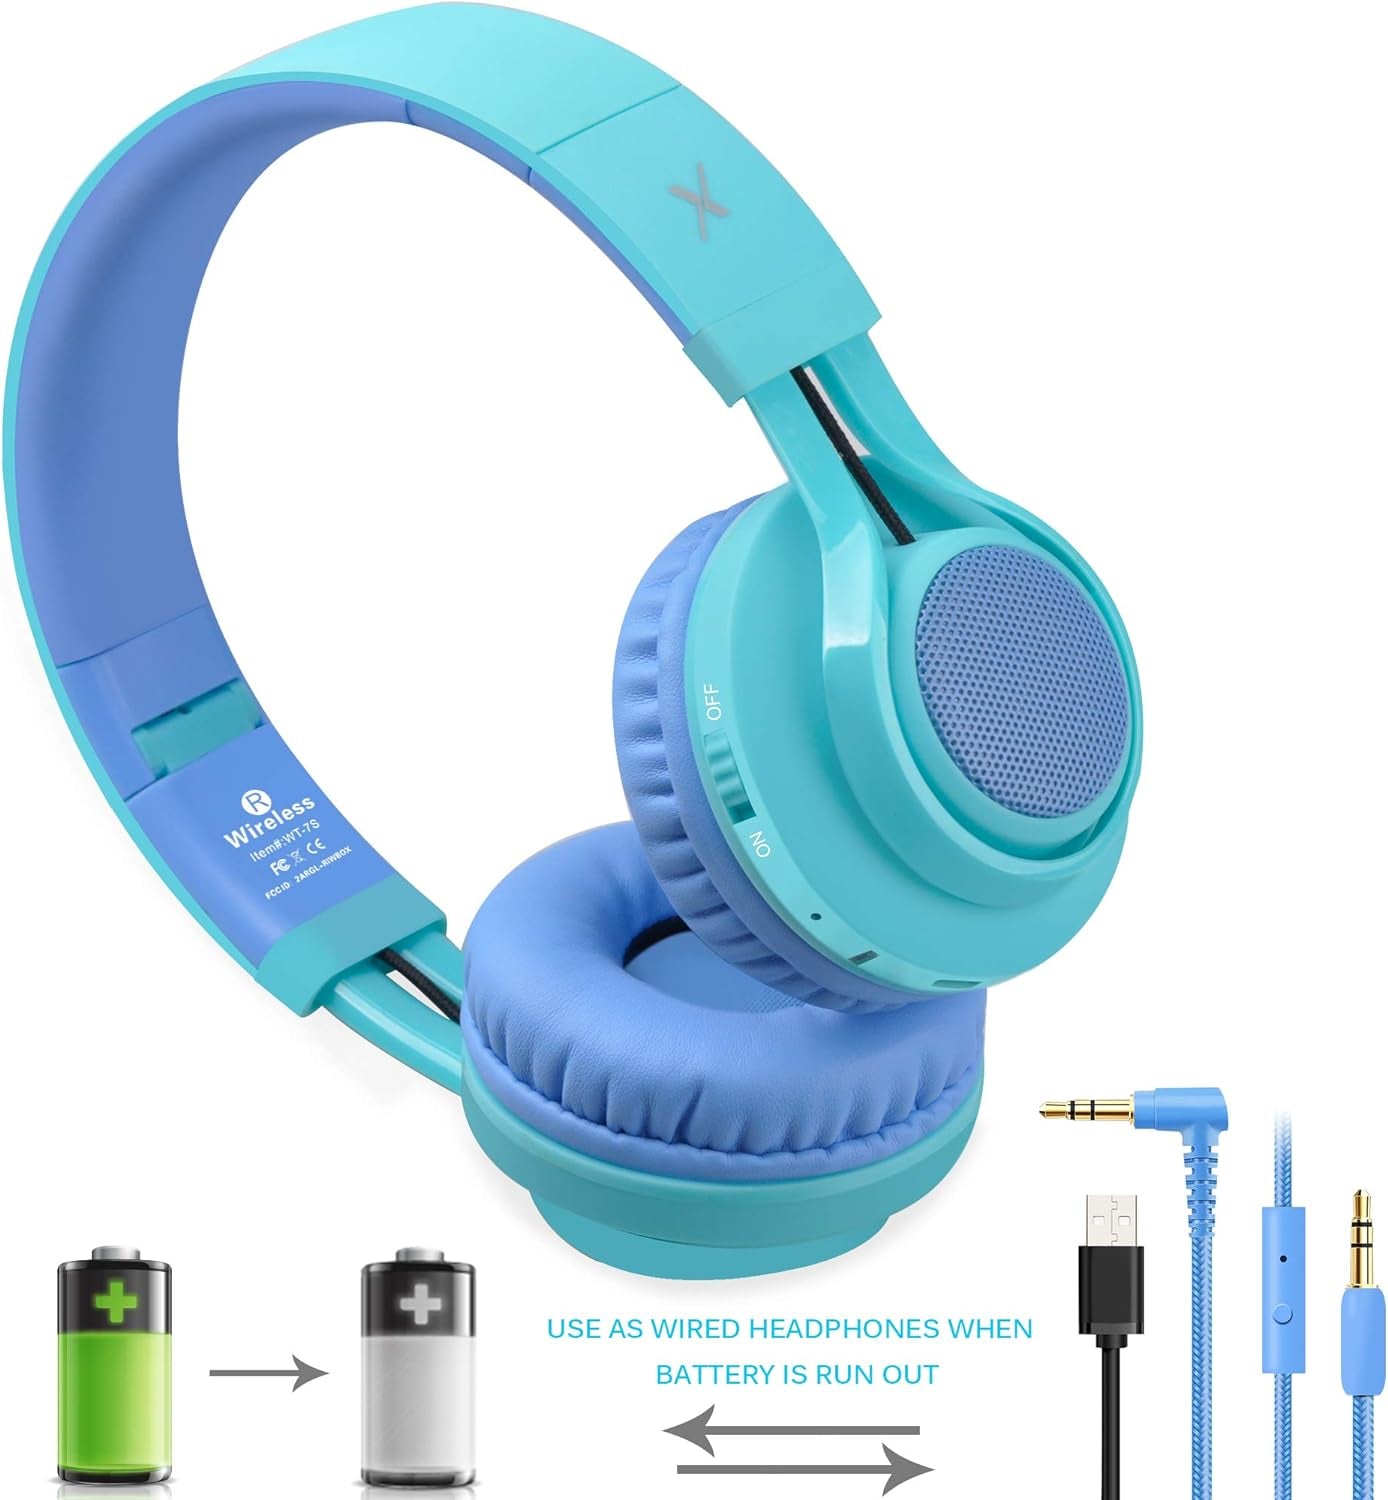 WT-7S Kids Bluetooth Headphones, LED Light up Wireless Foldable Stereo Headset with Microphone and Volume Control for Pc/Tablet/Tv/Travel (Blue)